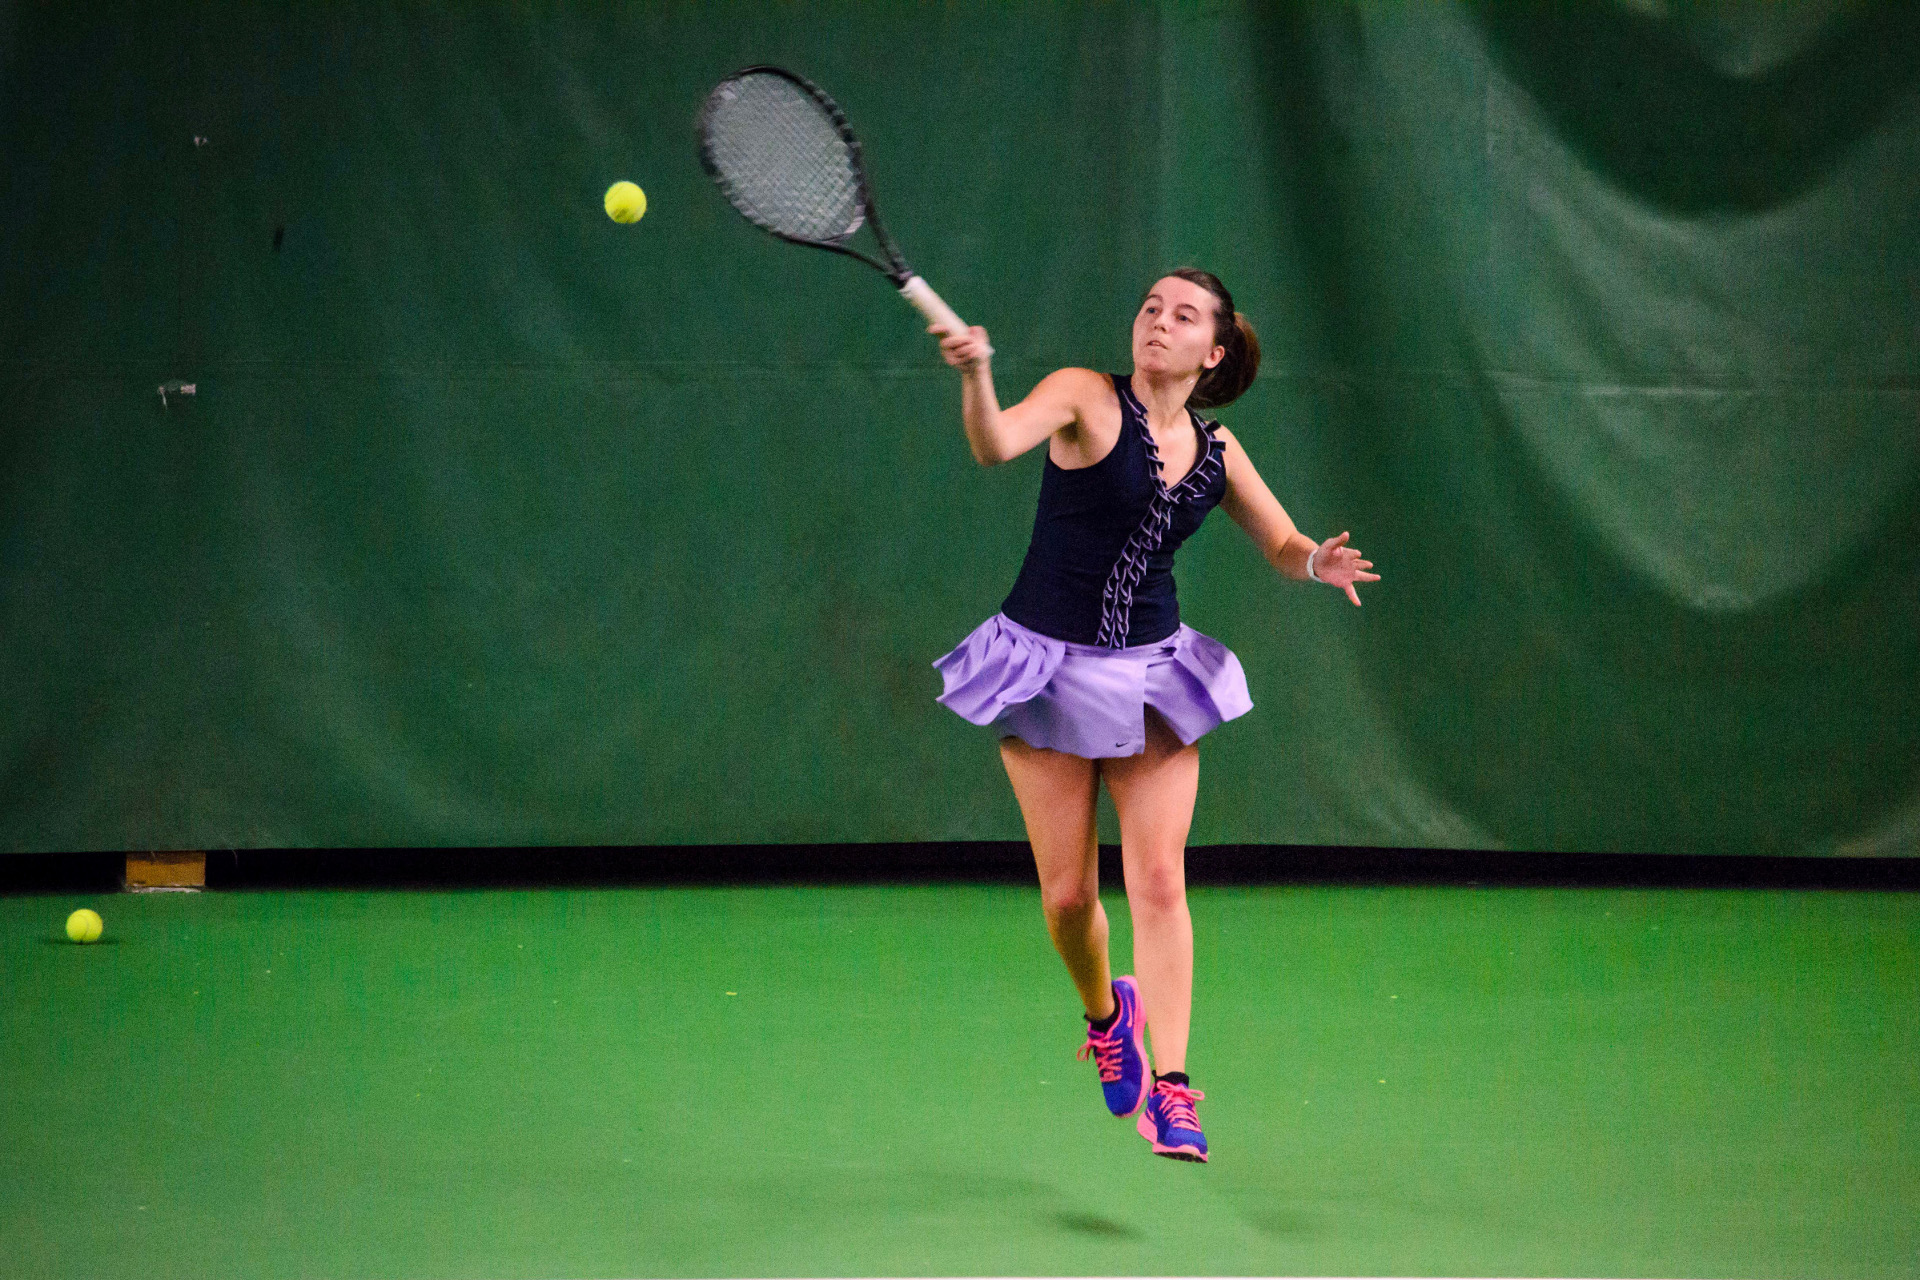 One of Elena's forehands during her first match